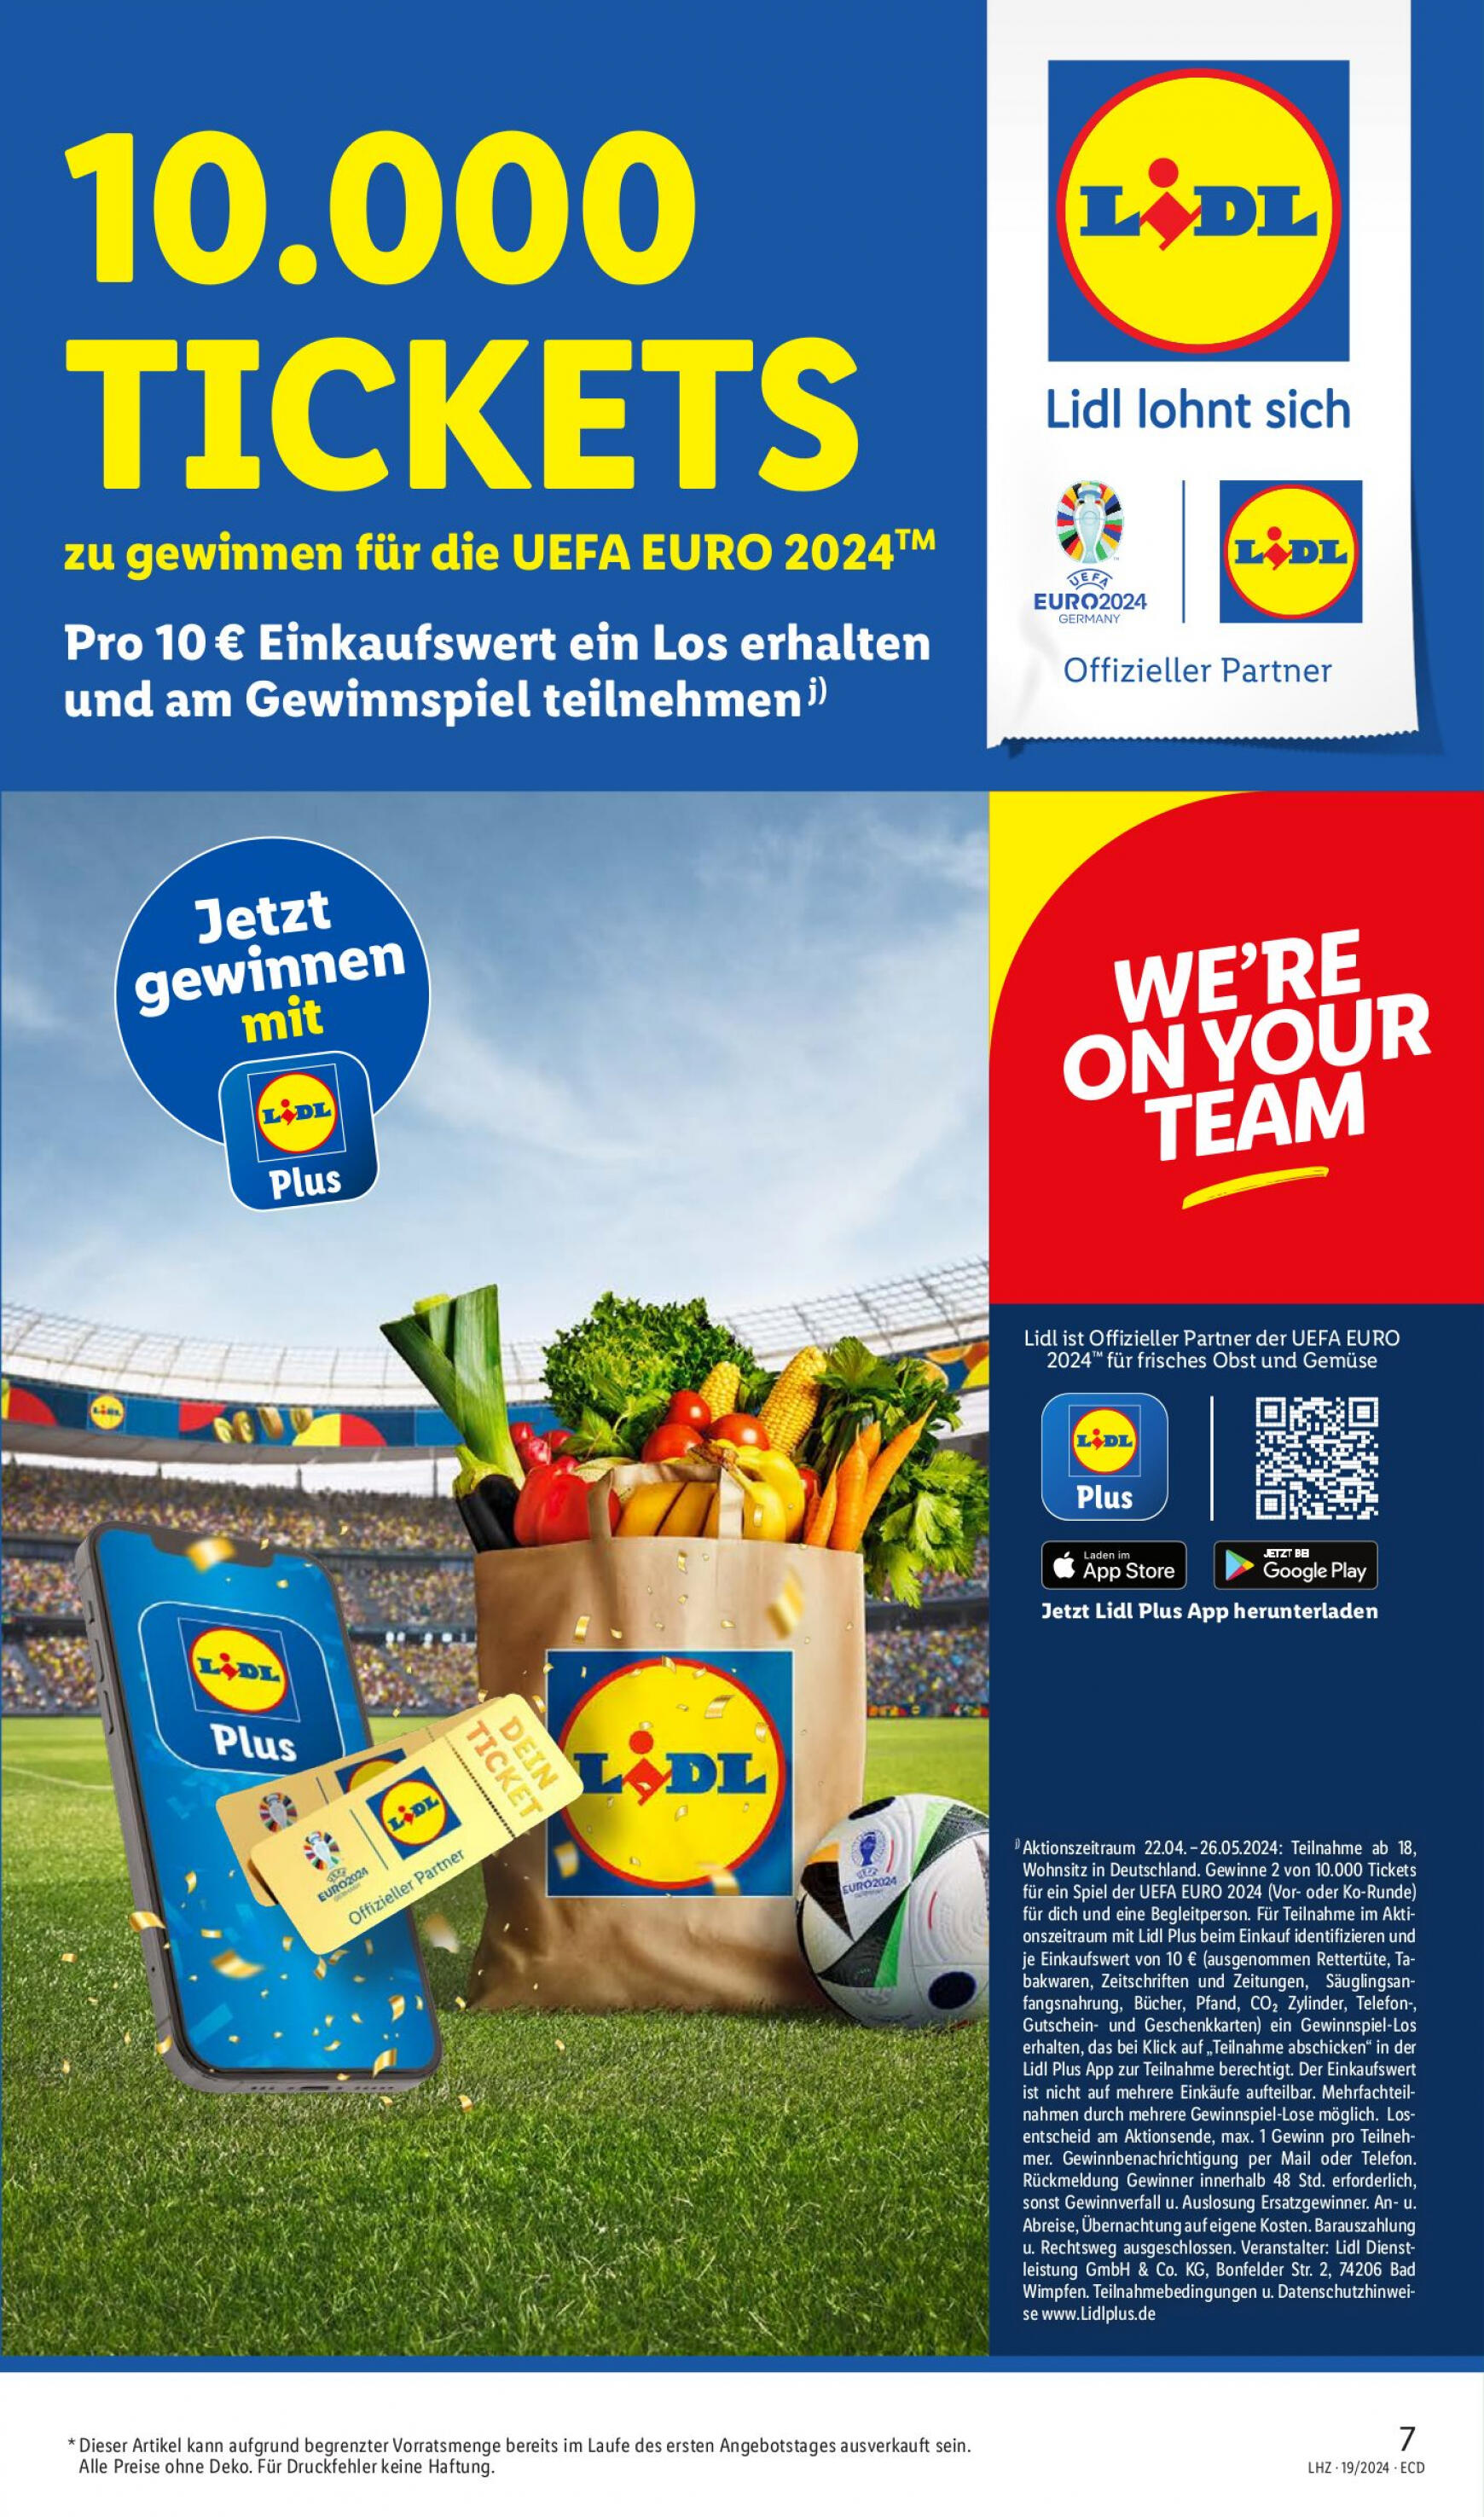 lidl - Flyer Lidl aktuell 06.05. - 11.05. - page: 7